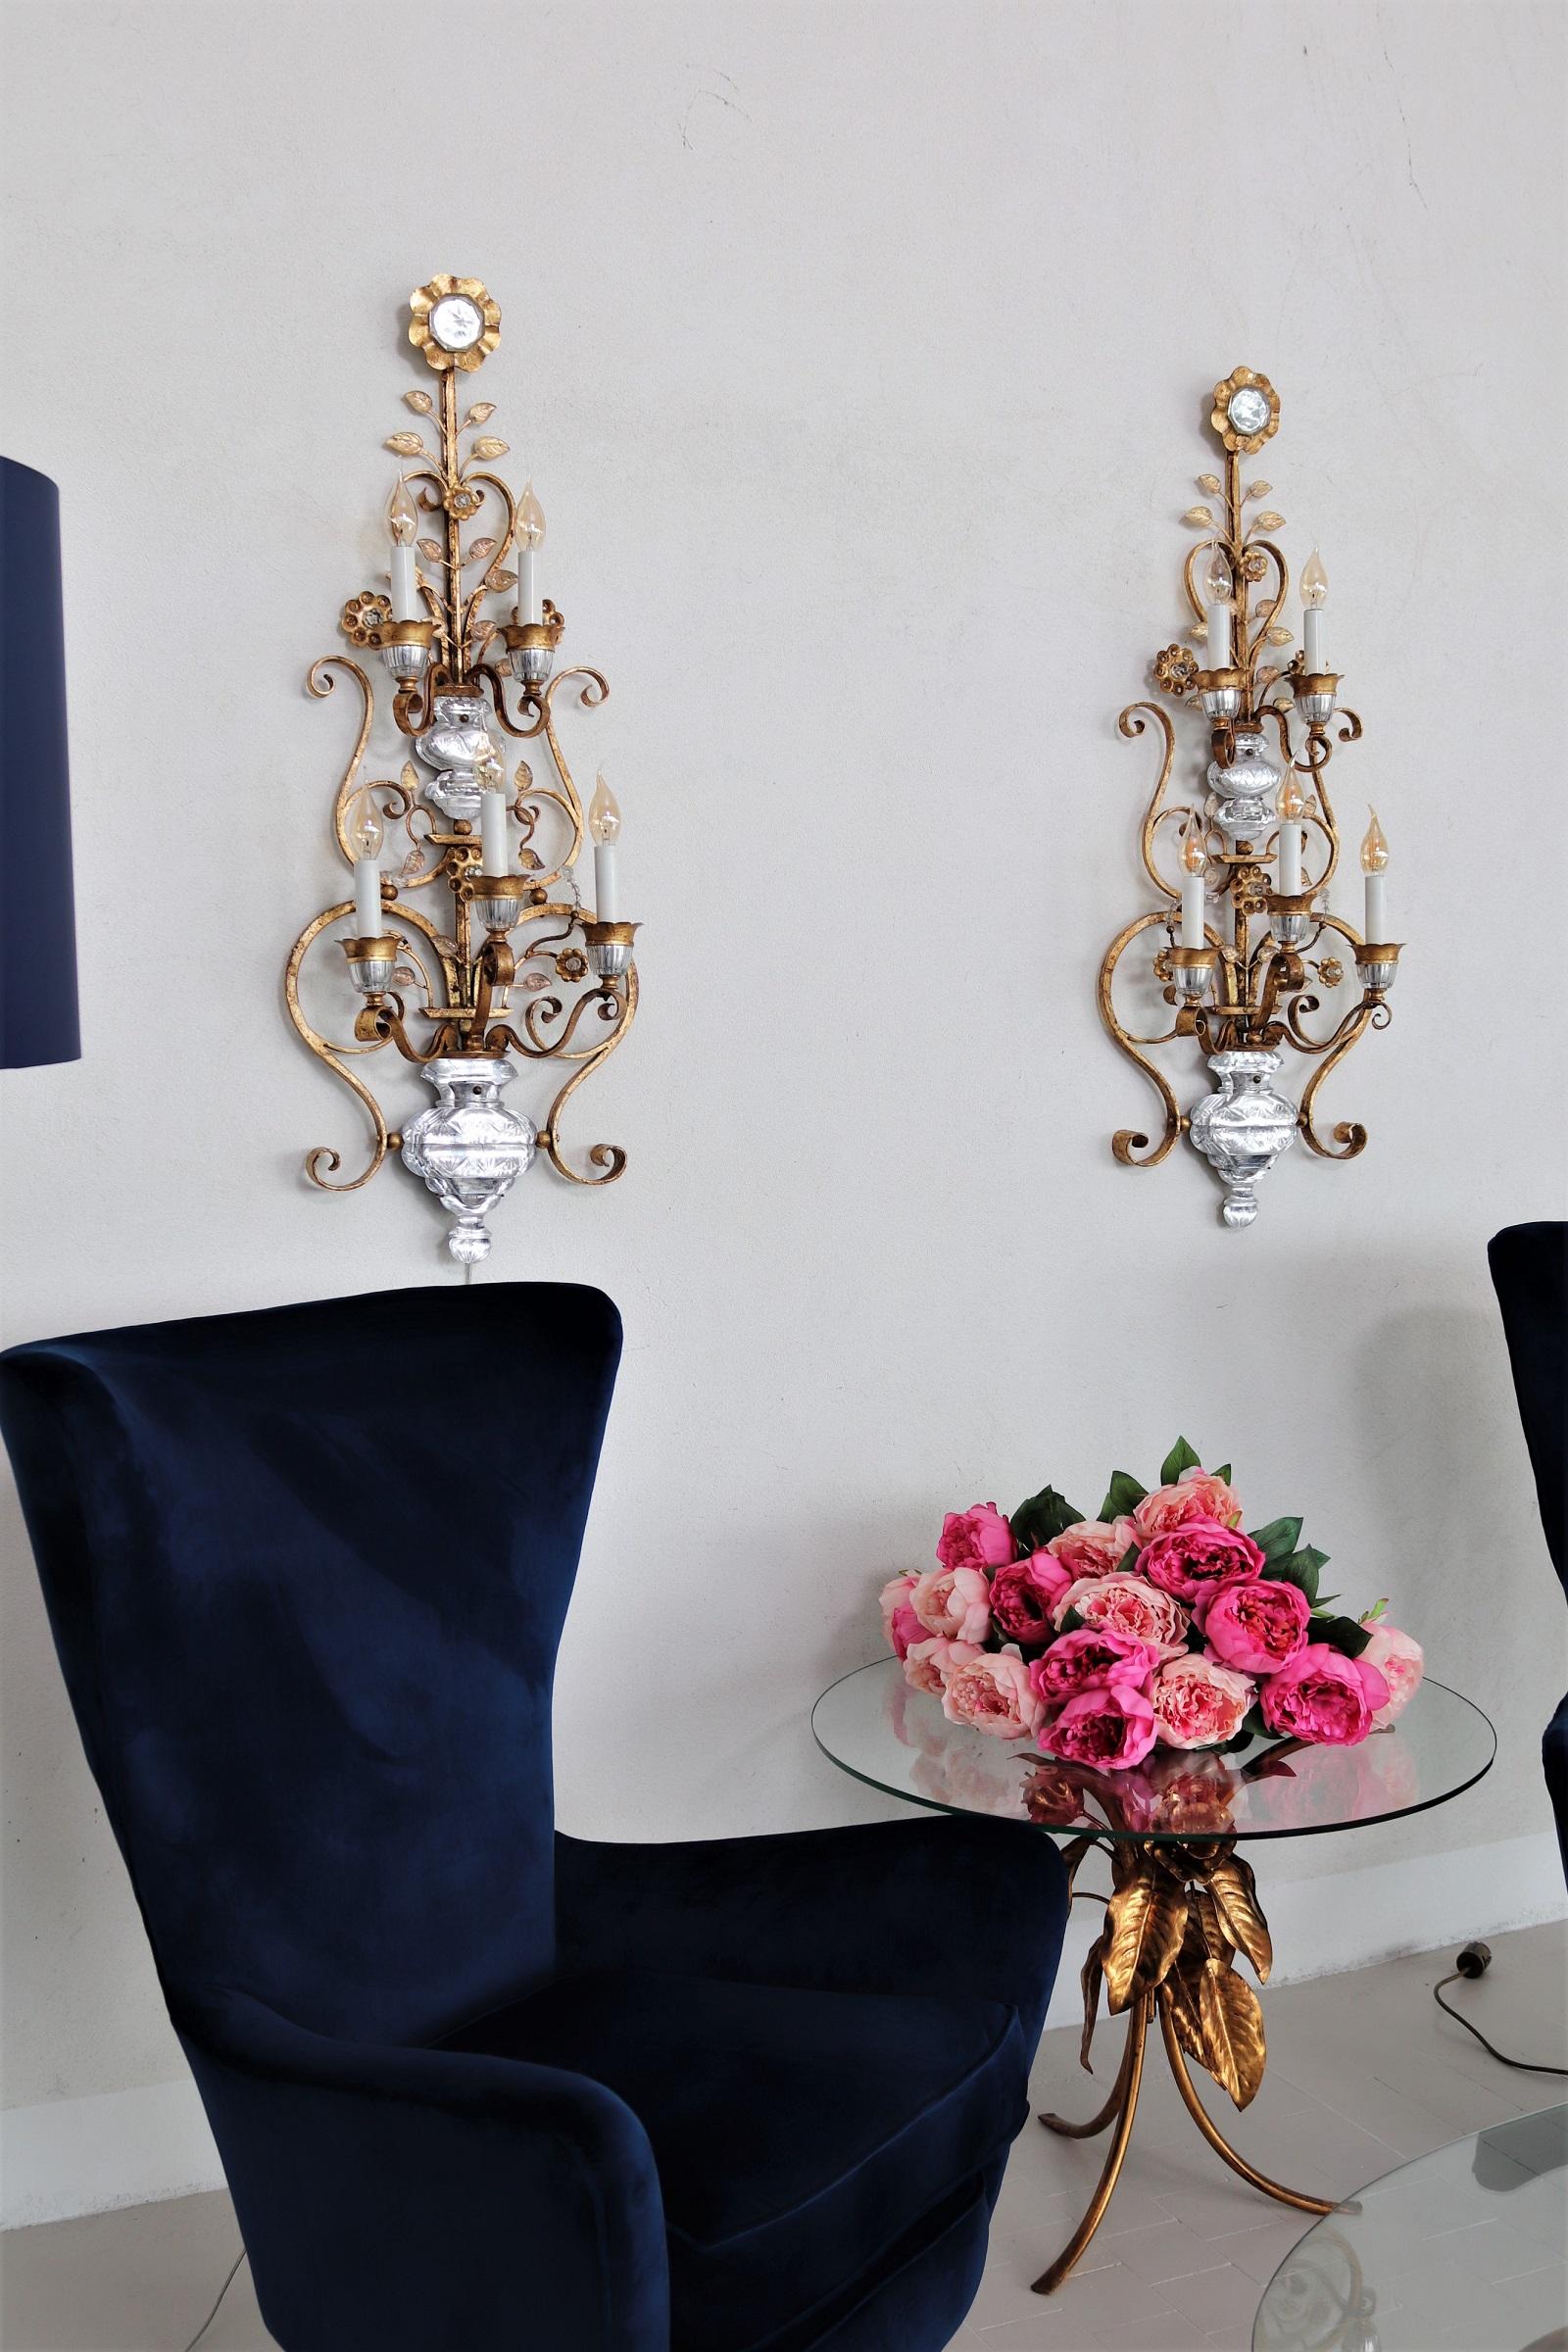 Mid-Century Modern Italian Florentine Crystal and Gilt Iron Wall Sconces by Banci Florence, 1960s